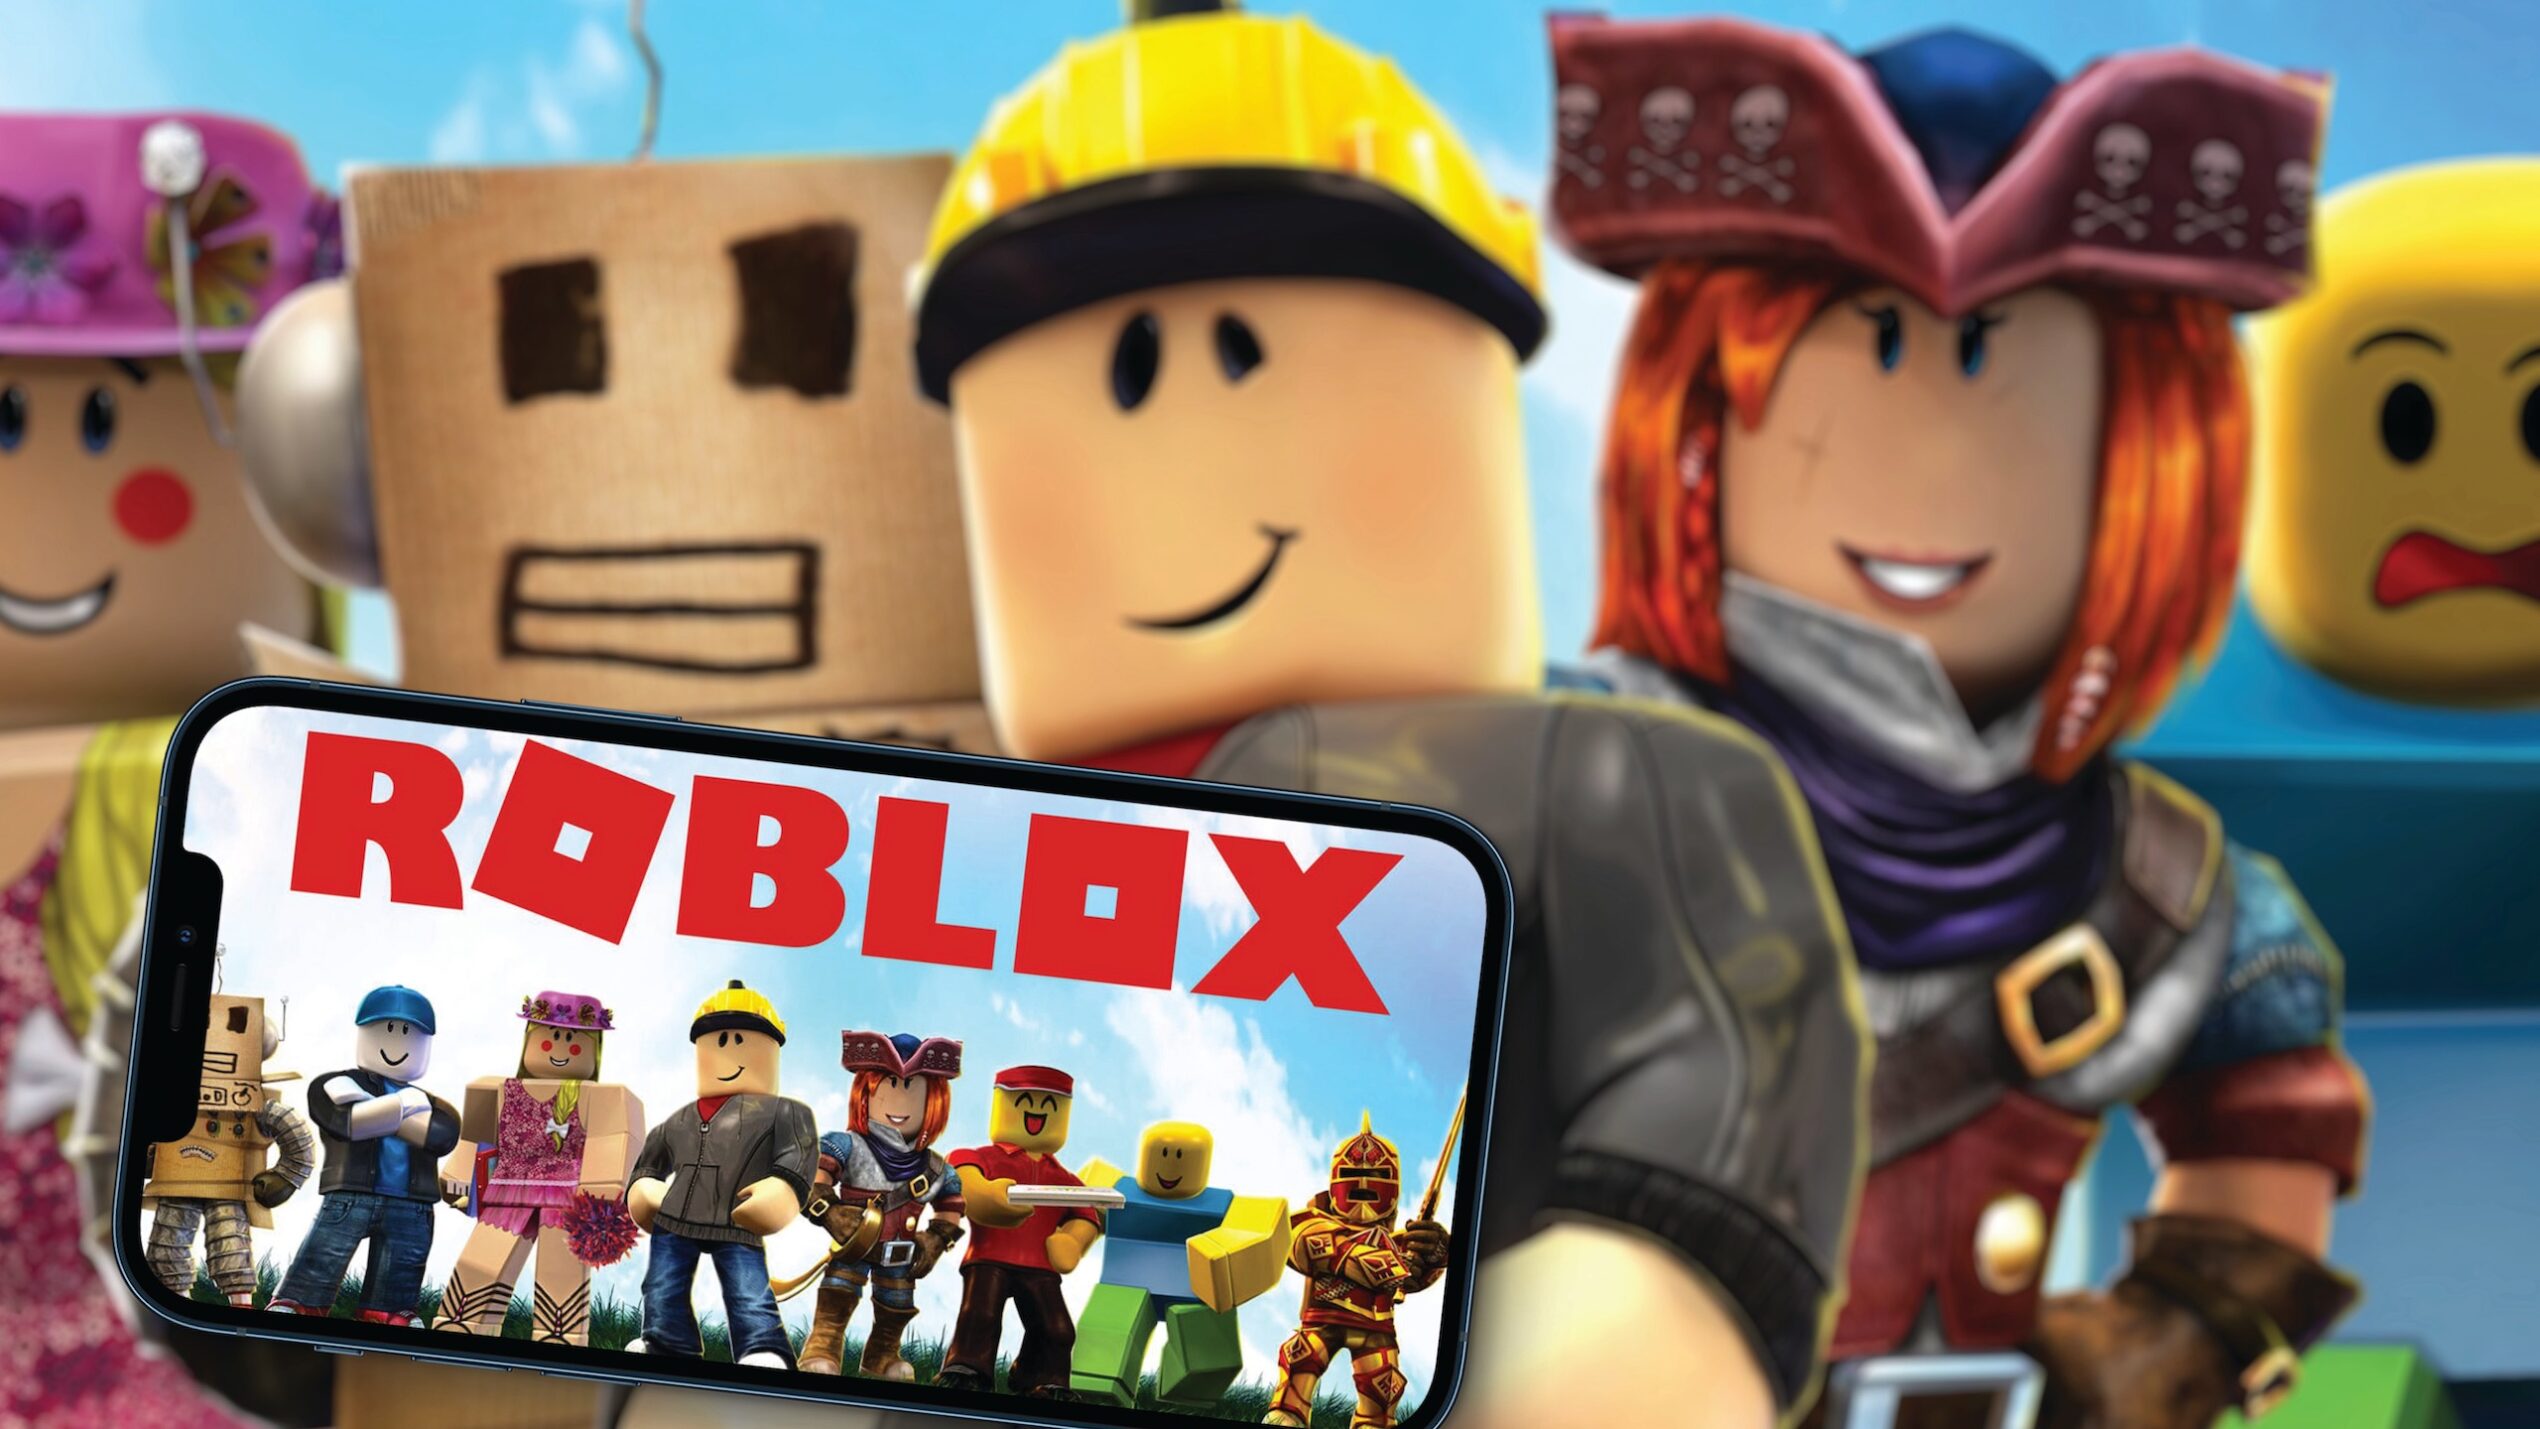 What's Going On With Roblox Stock Wednesday?